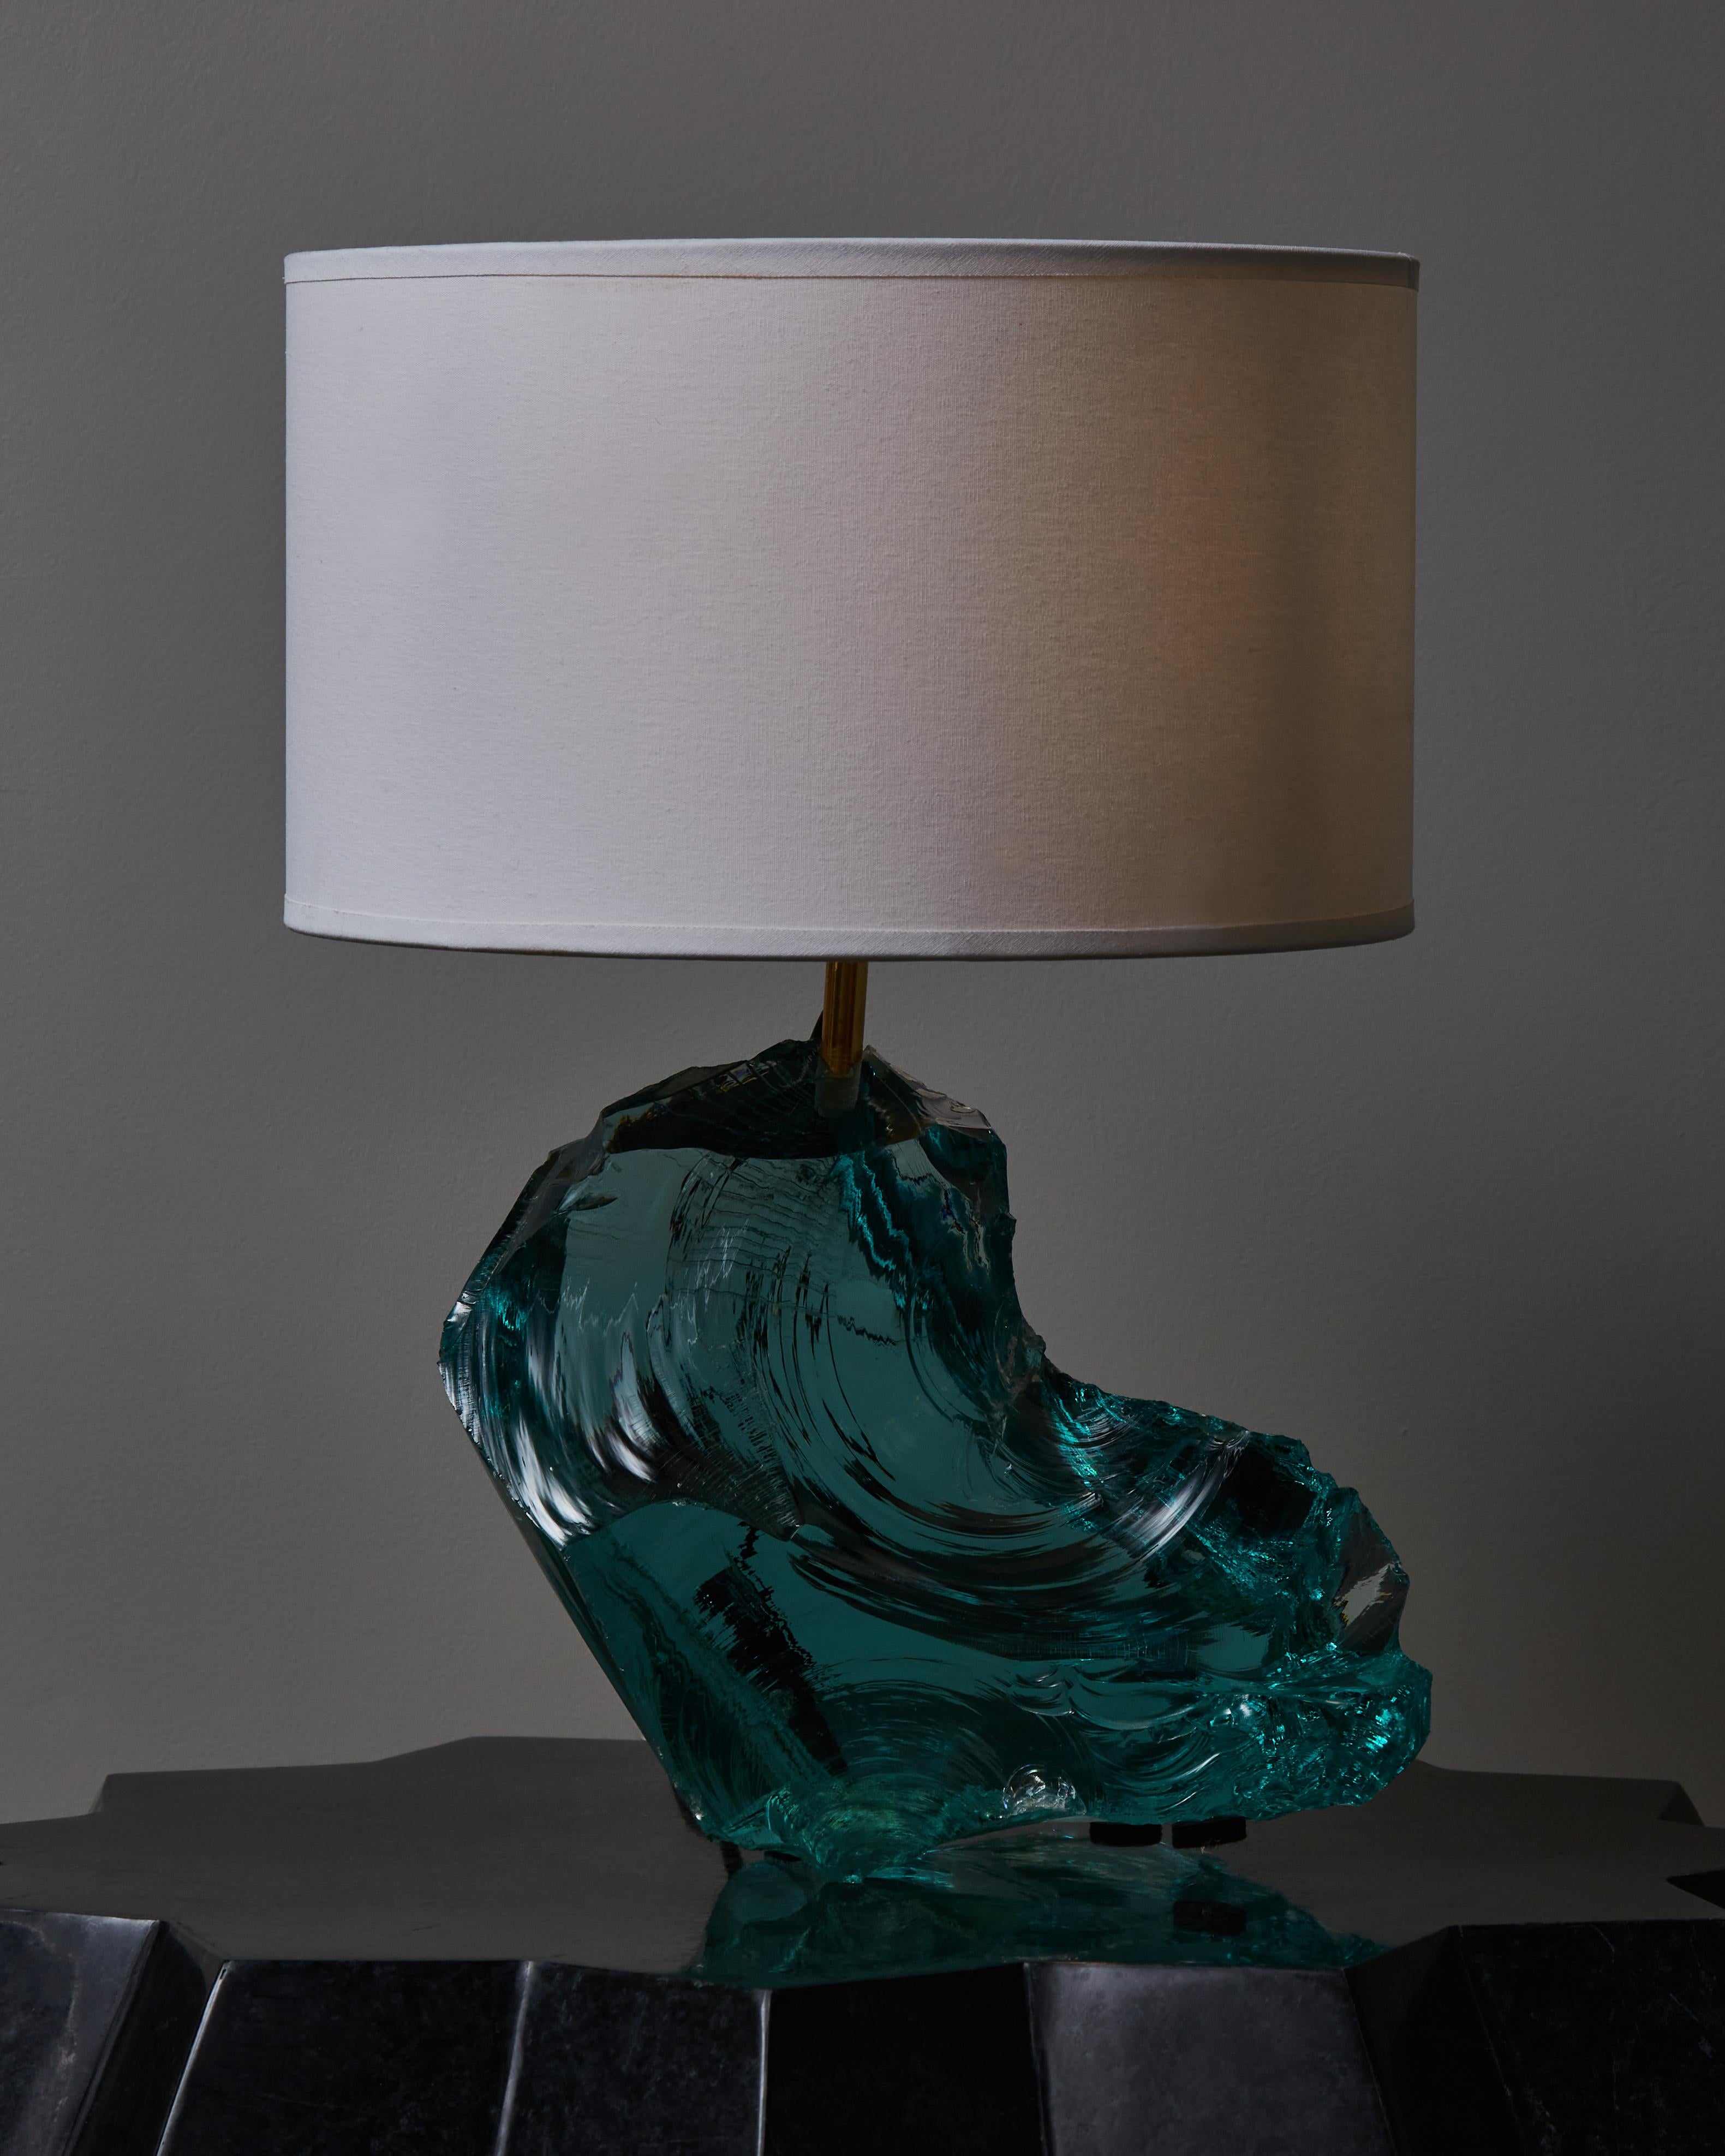 Free shaped hammered glass table lamp made of a single blue/green massive glass piece and brass fitting.